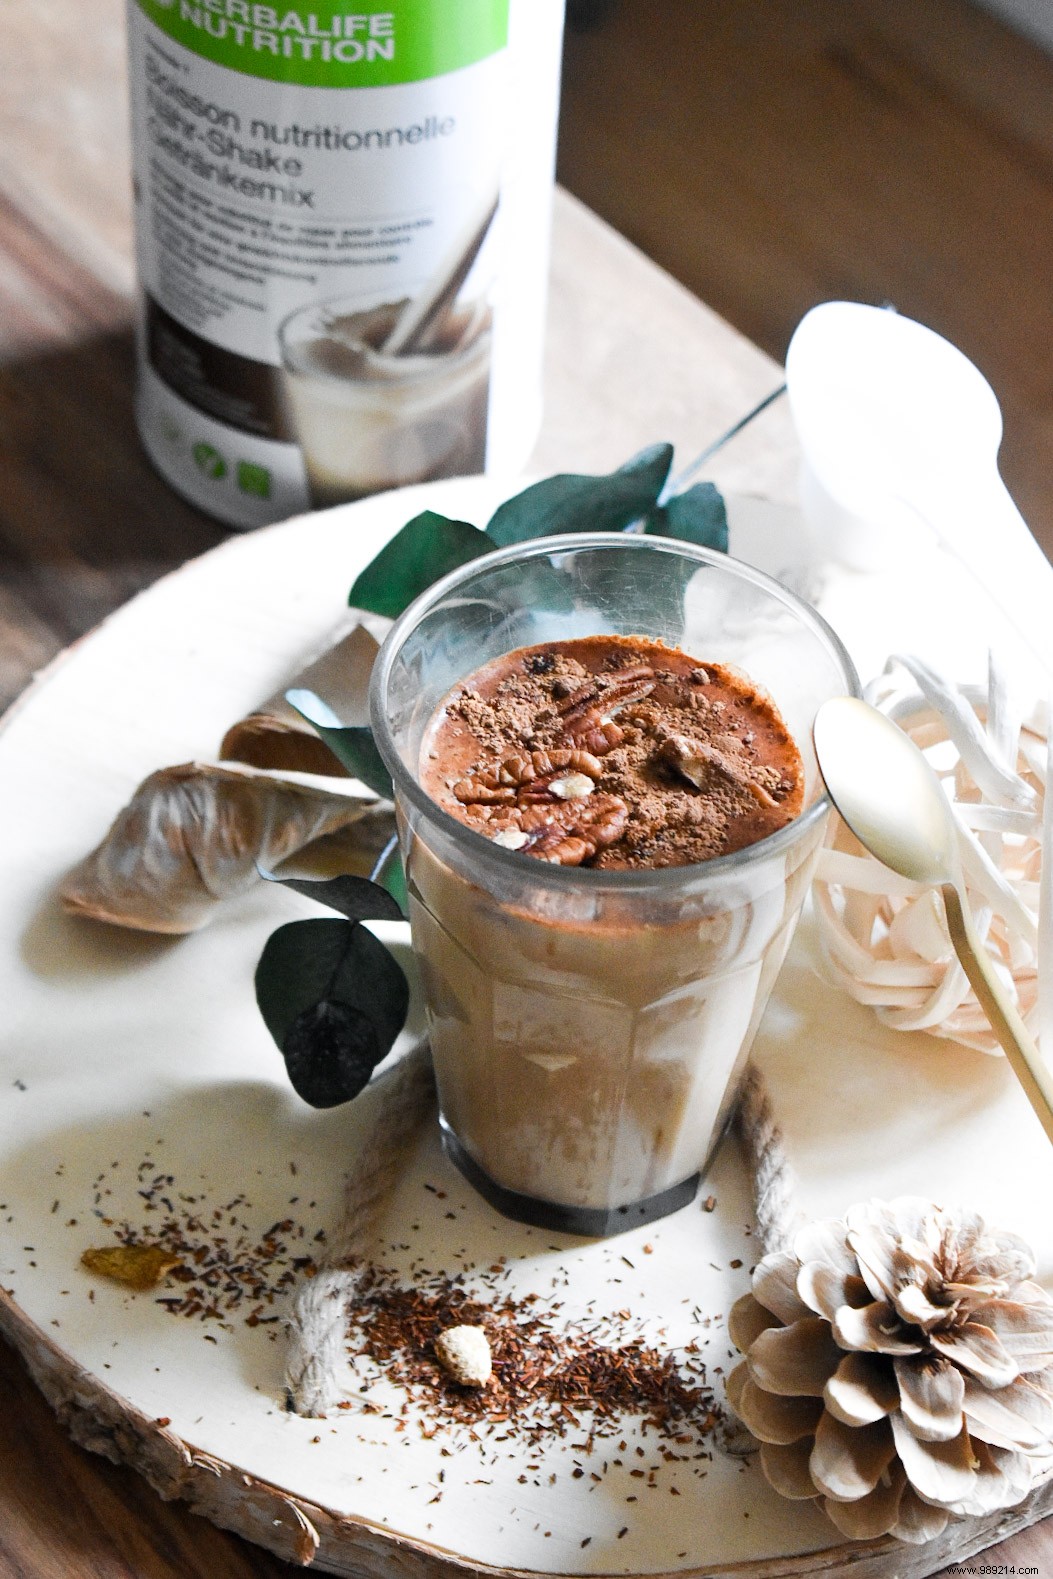 My Complete Breakfast with Formula 1 Café Latte – Herbalife Nutrition 